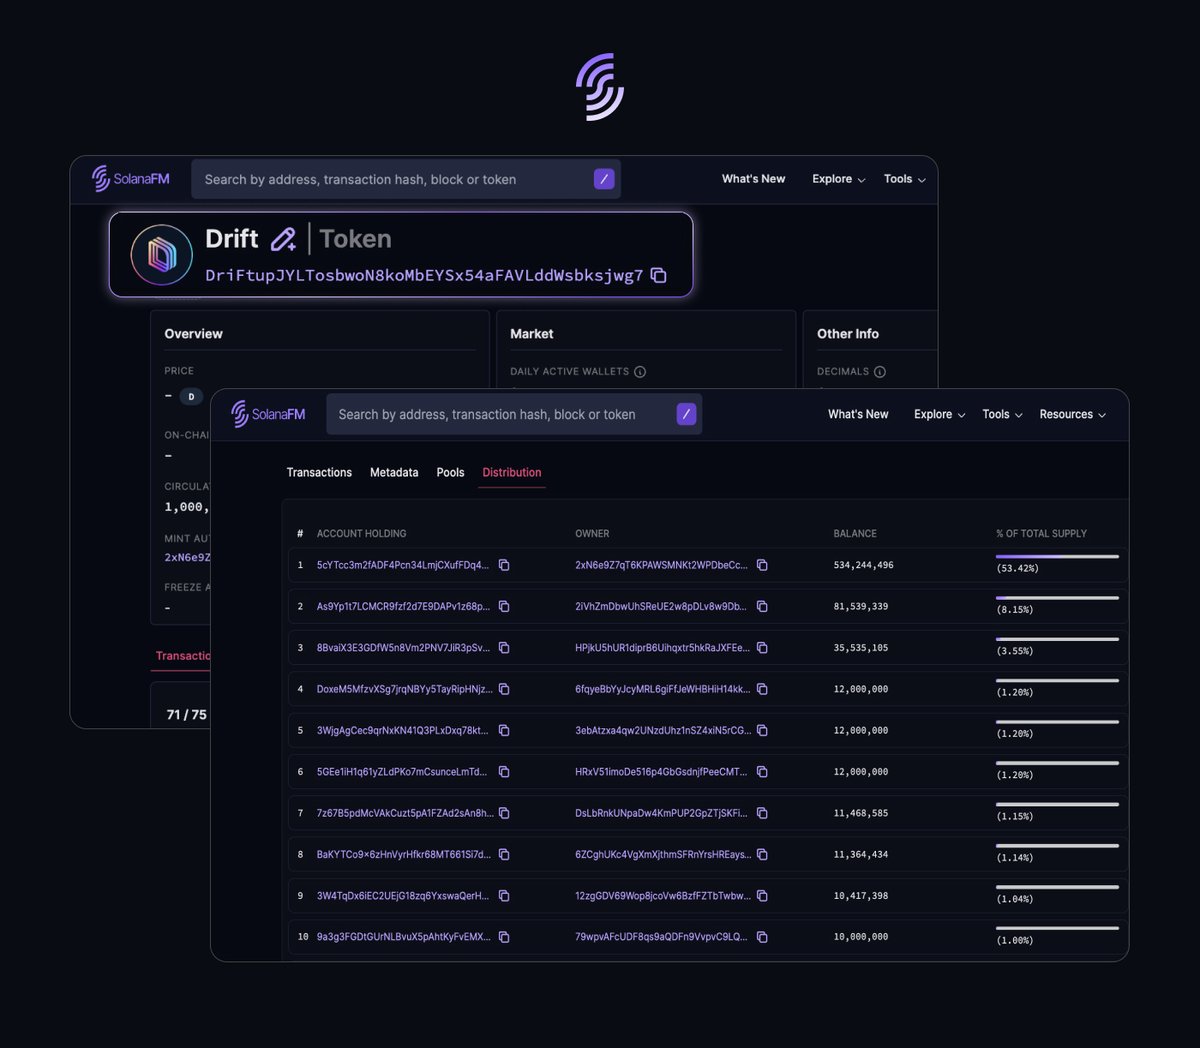 The @DriftFDN airdrop claim will go live soon View the token page on SolanaFM for the latest on-chain activities. As the claim goes live, you can also explore the distribution tab to see the full list of holders. The token contract is labelled on our explorer: